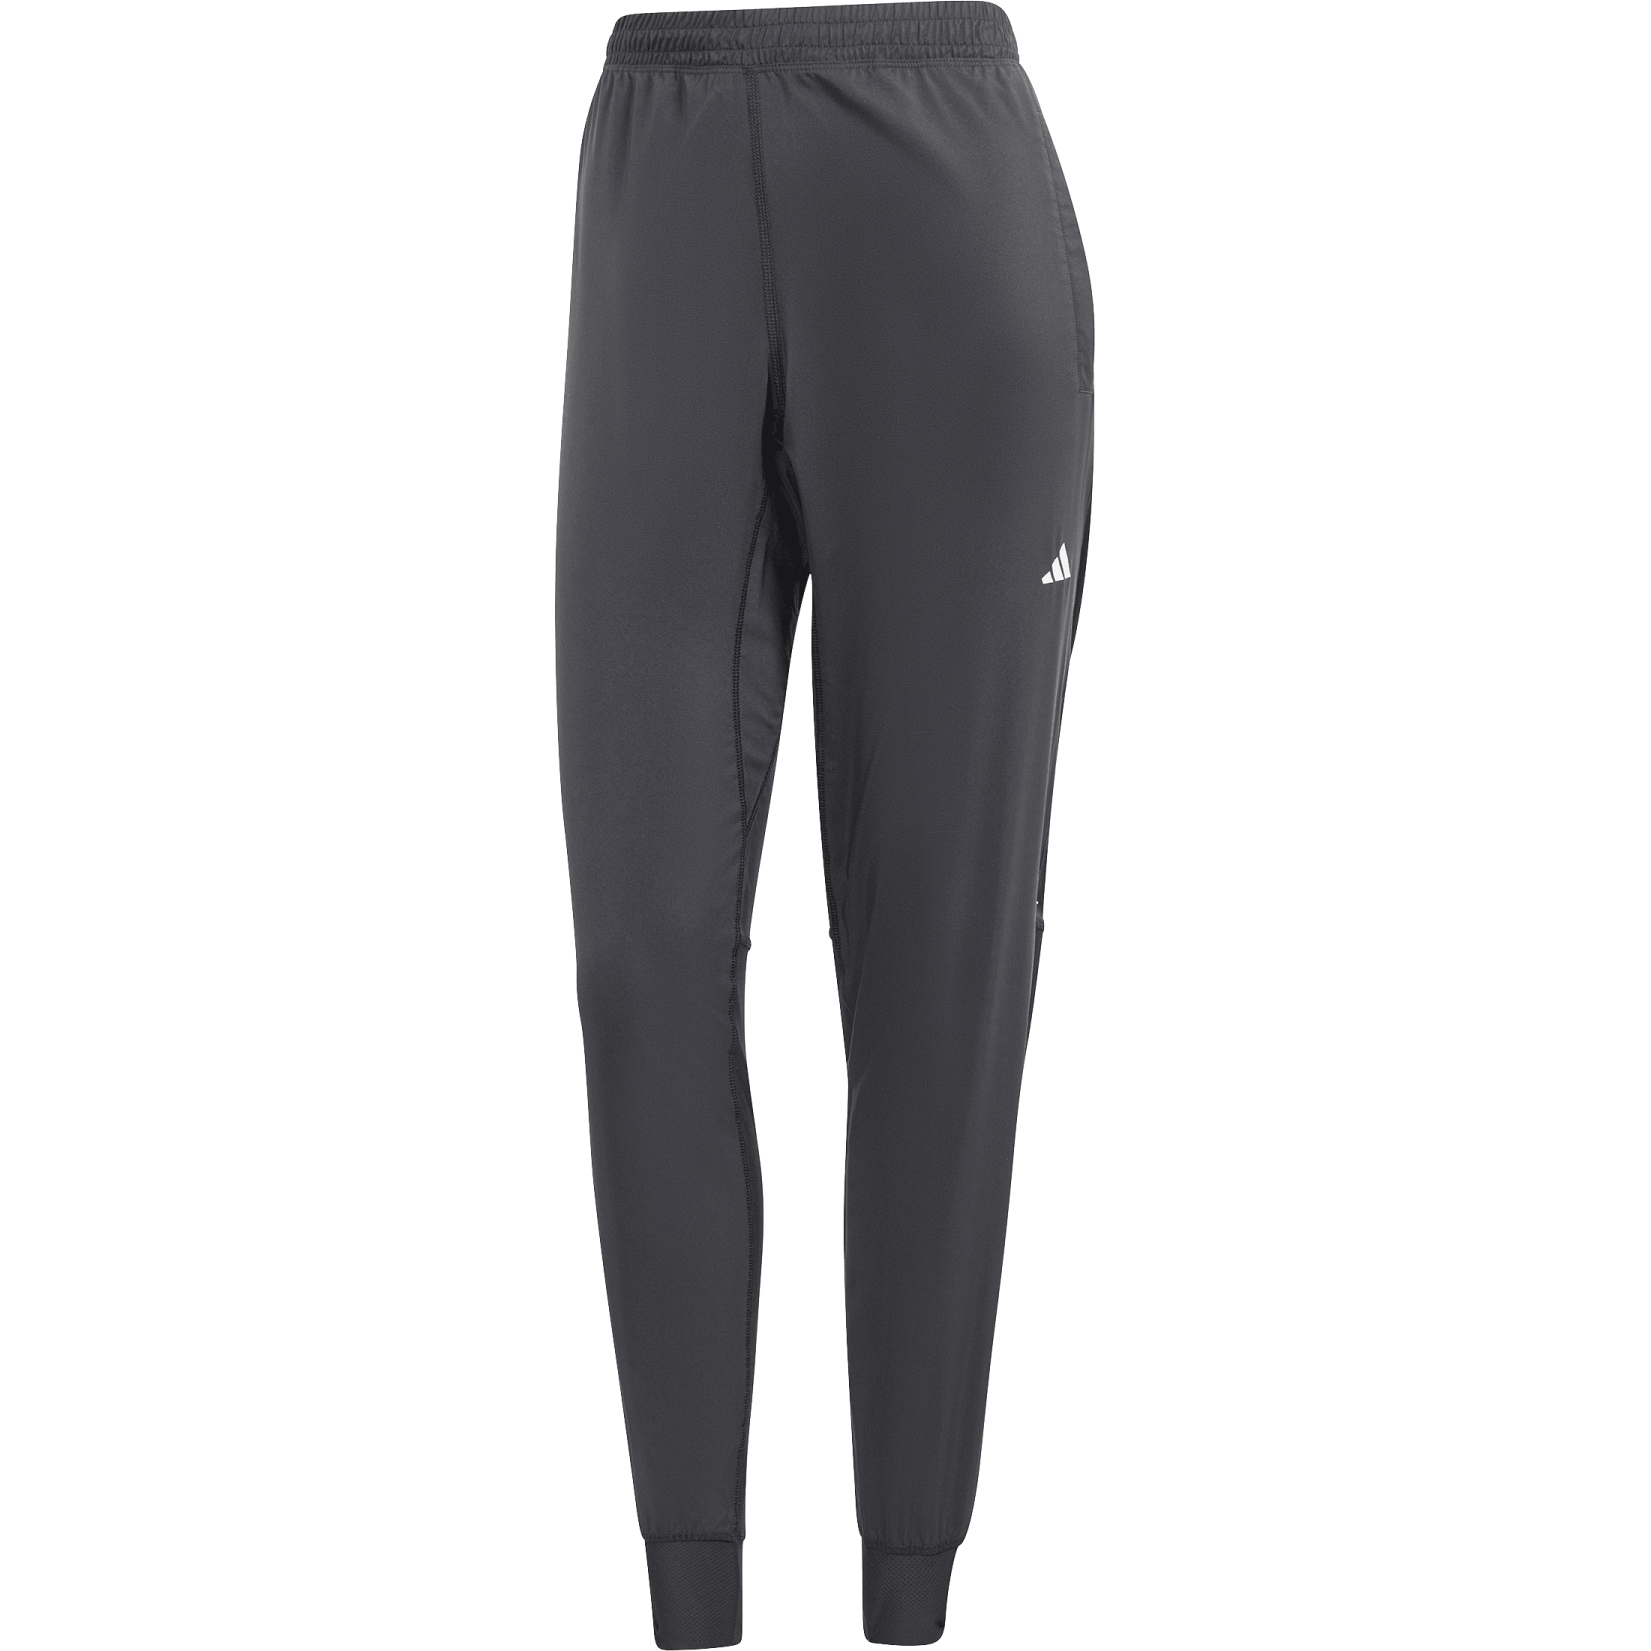 Picture of adidas Own The Run Pants Women - black IK7444